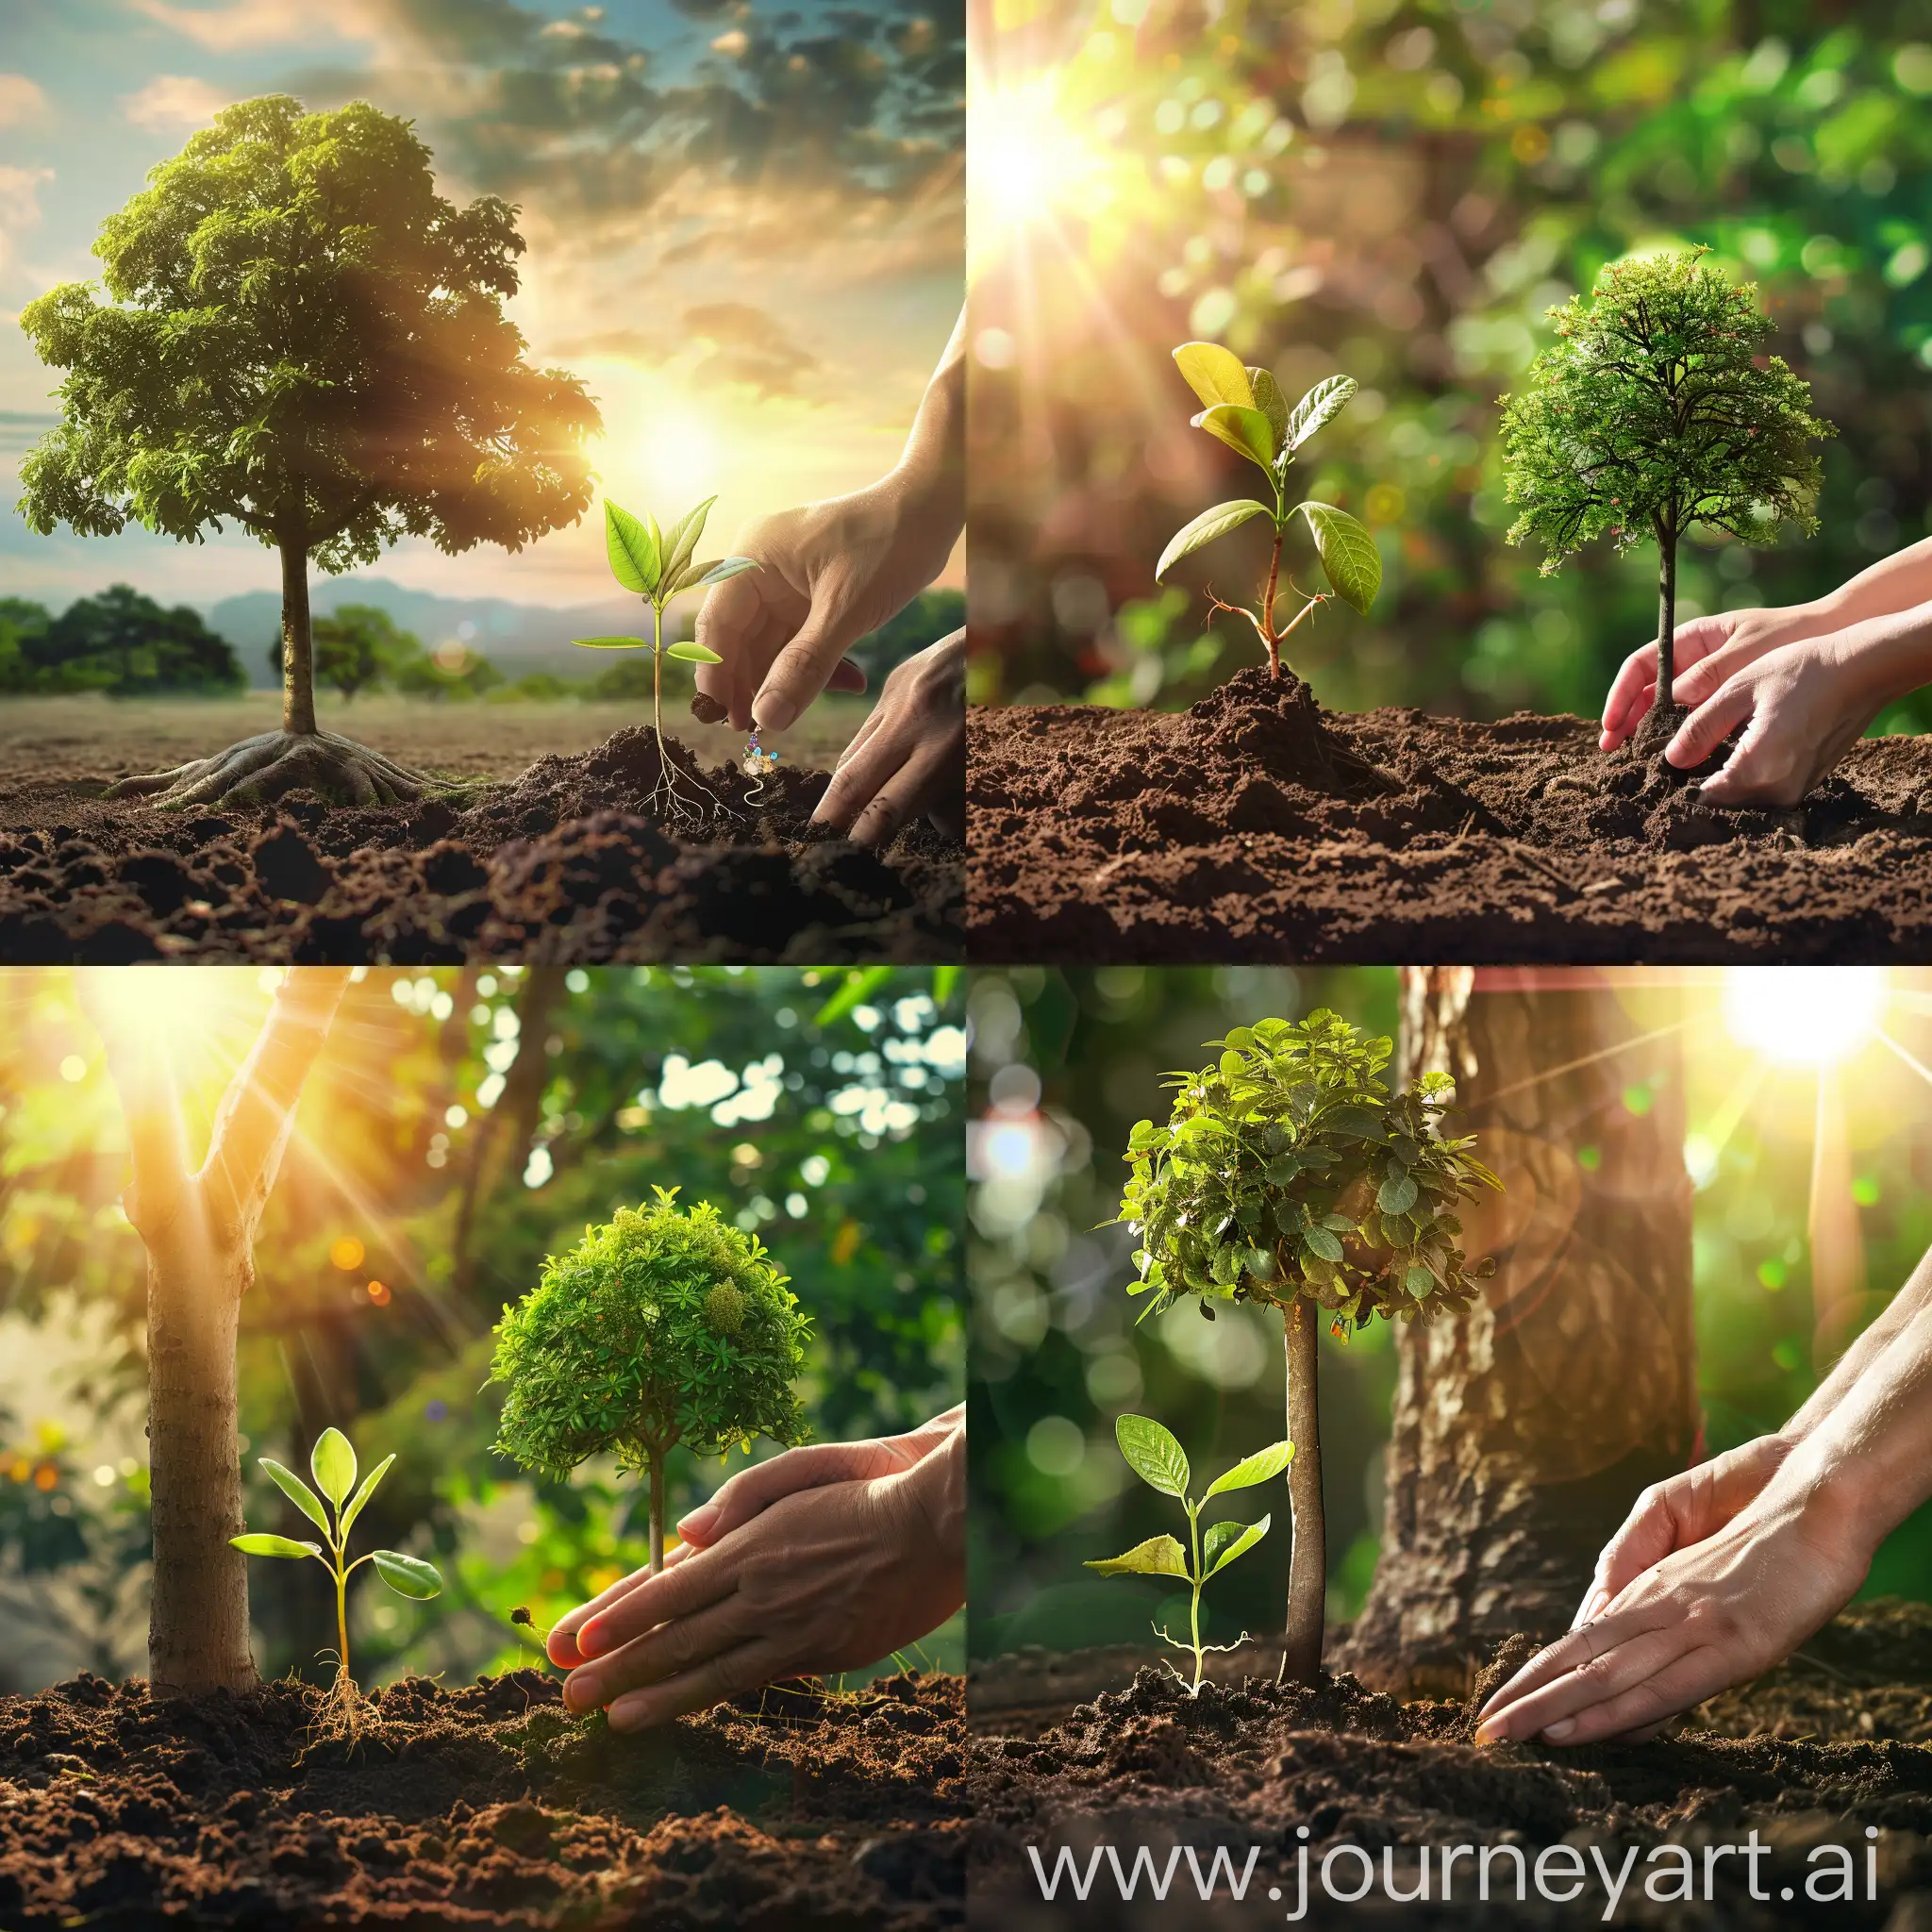 Sunlit-Day-Planting-Human-Hands-Nurture-Young-Sprout-Beside-Mature-Tree